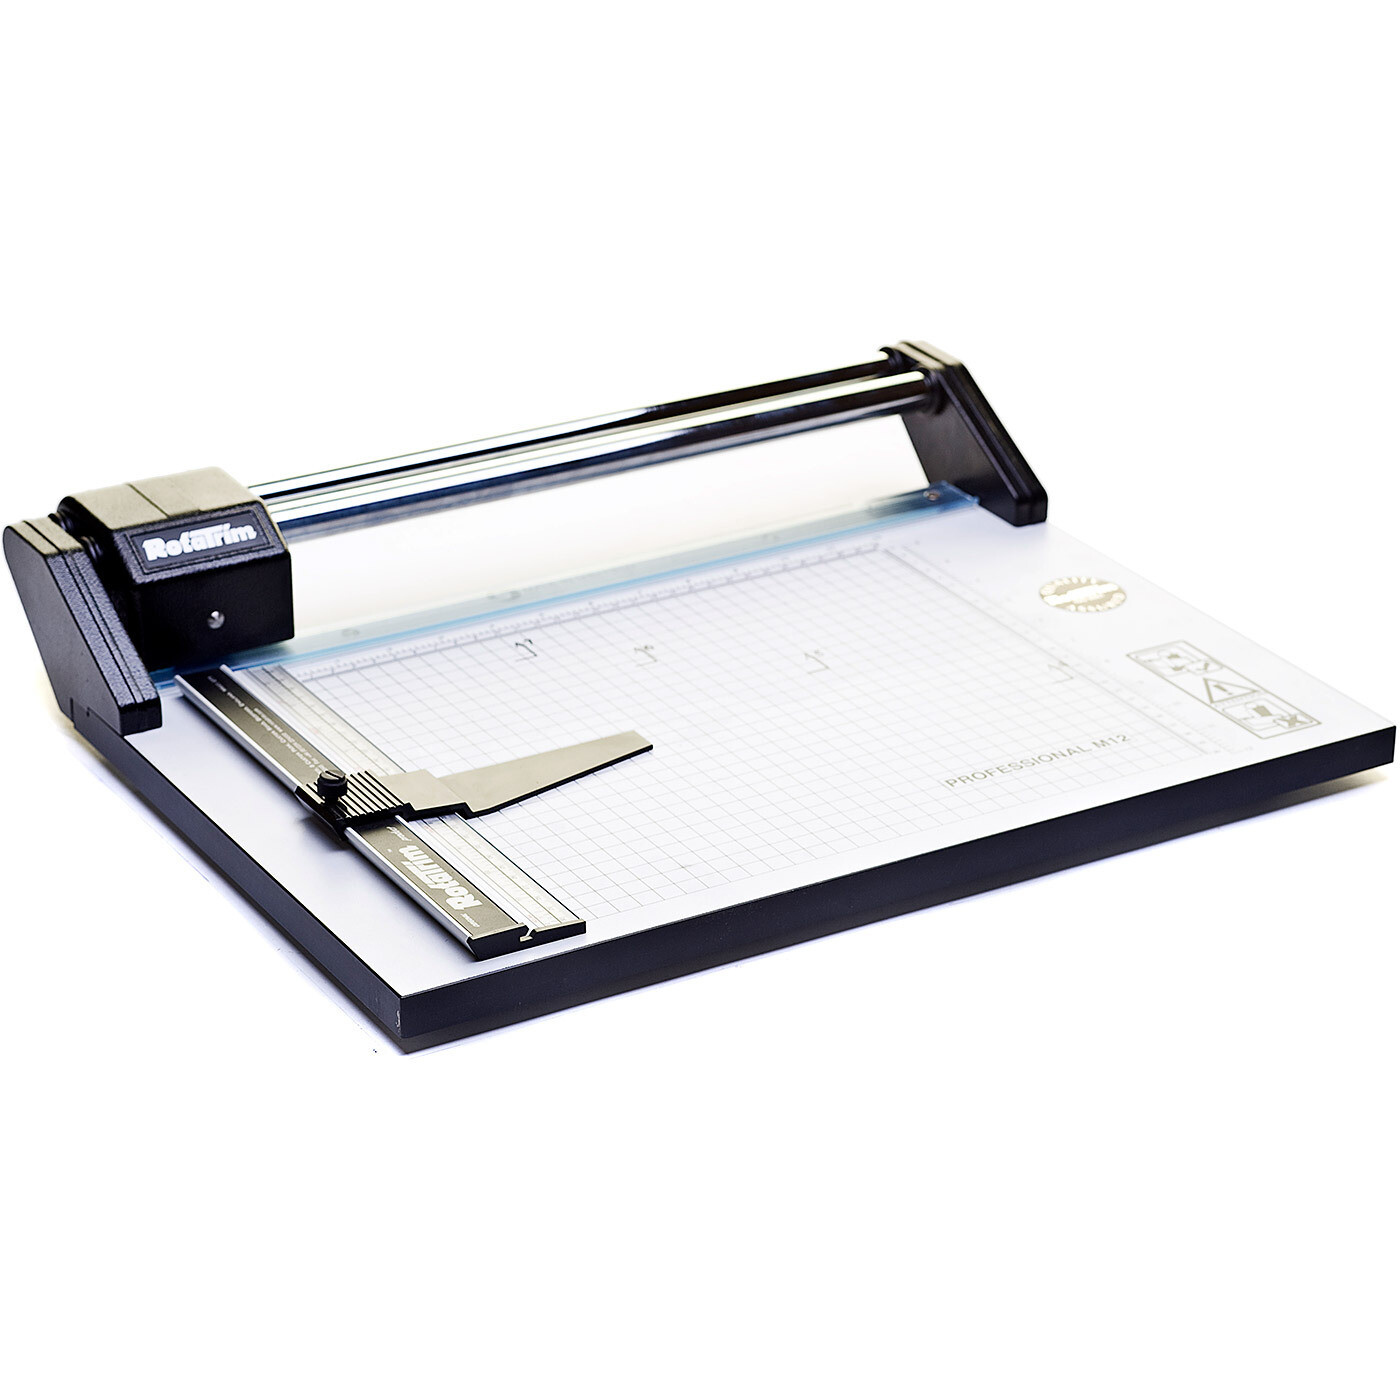 Rotatrim M12 Pro Series 12 Paper Cutter / Rotary Trimmer - On demand